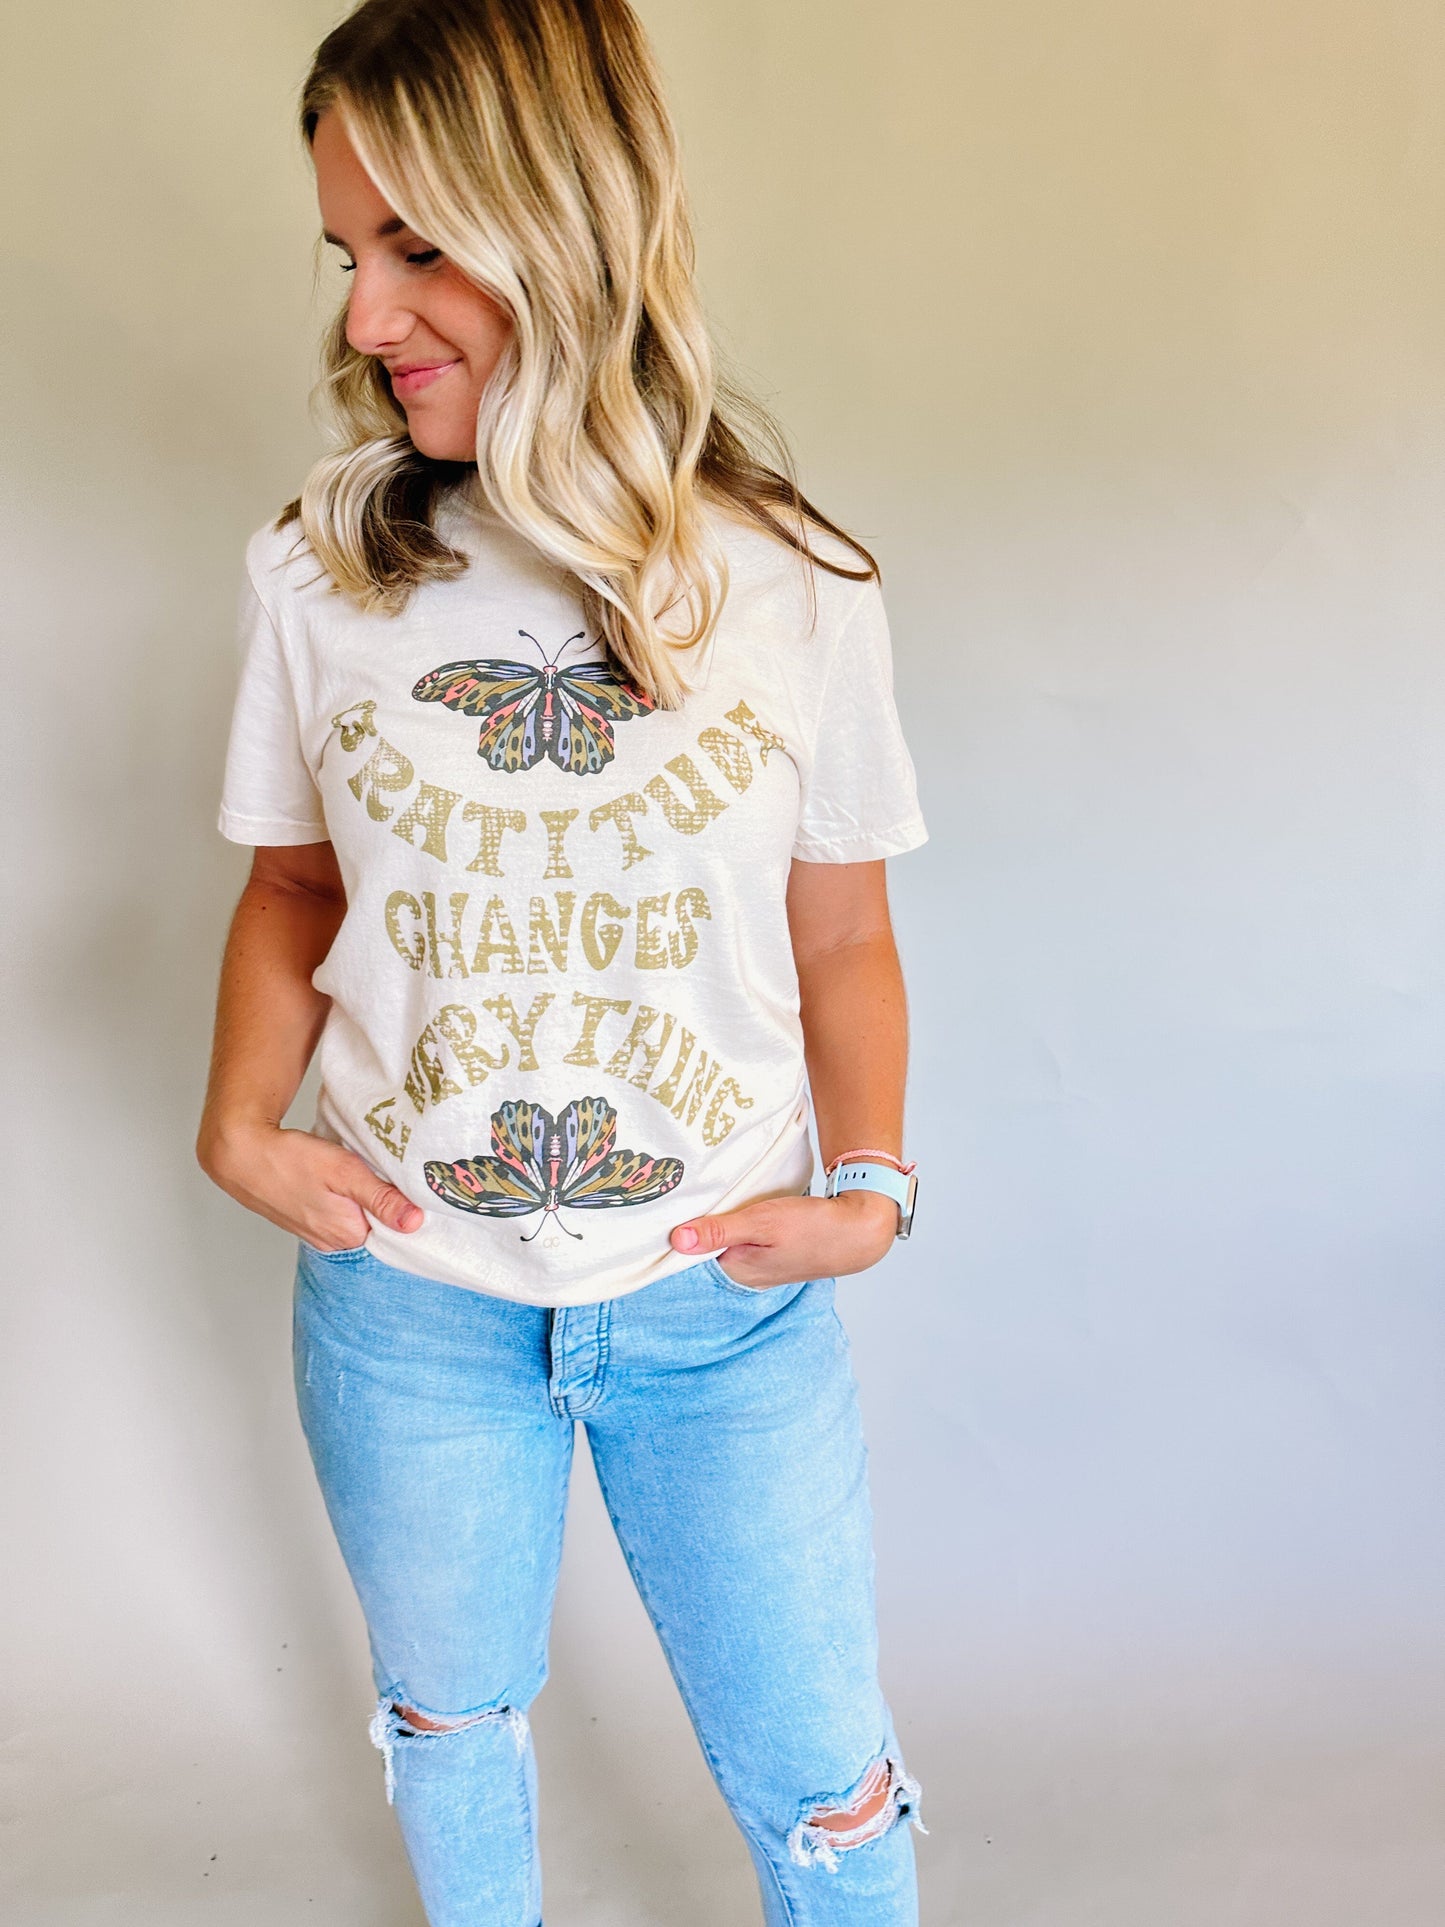 Gratitude Changes Everything Tee